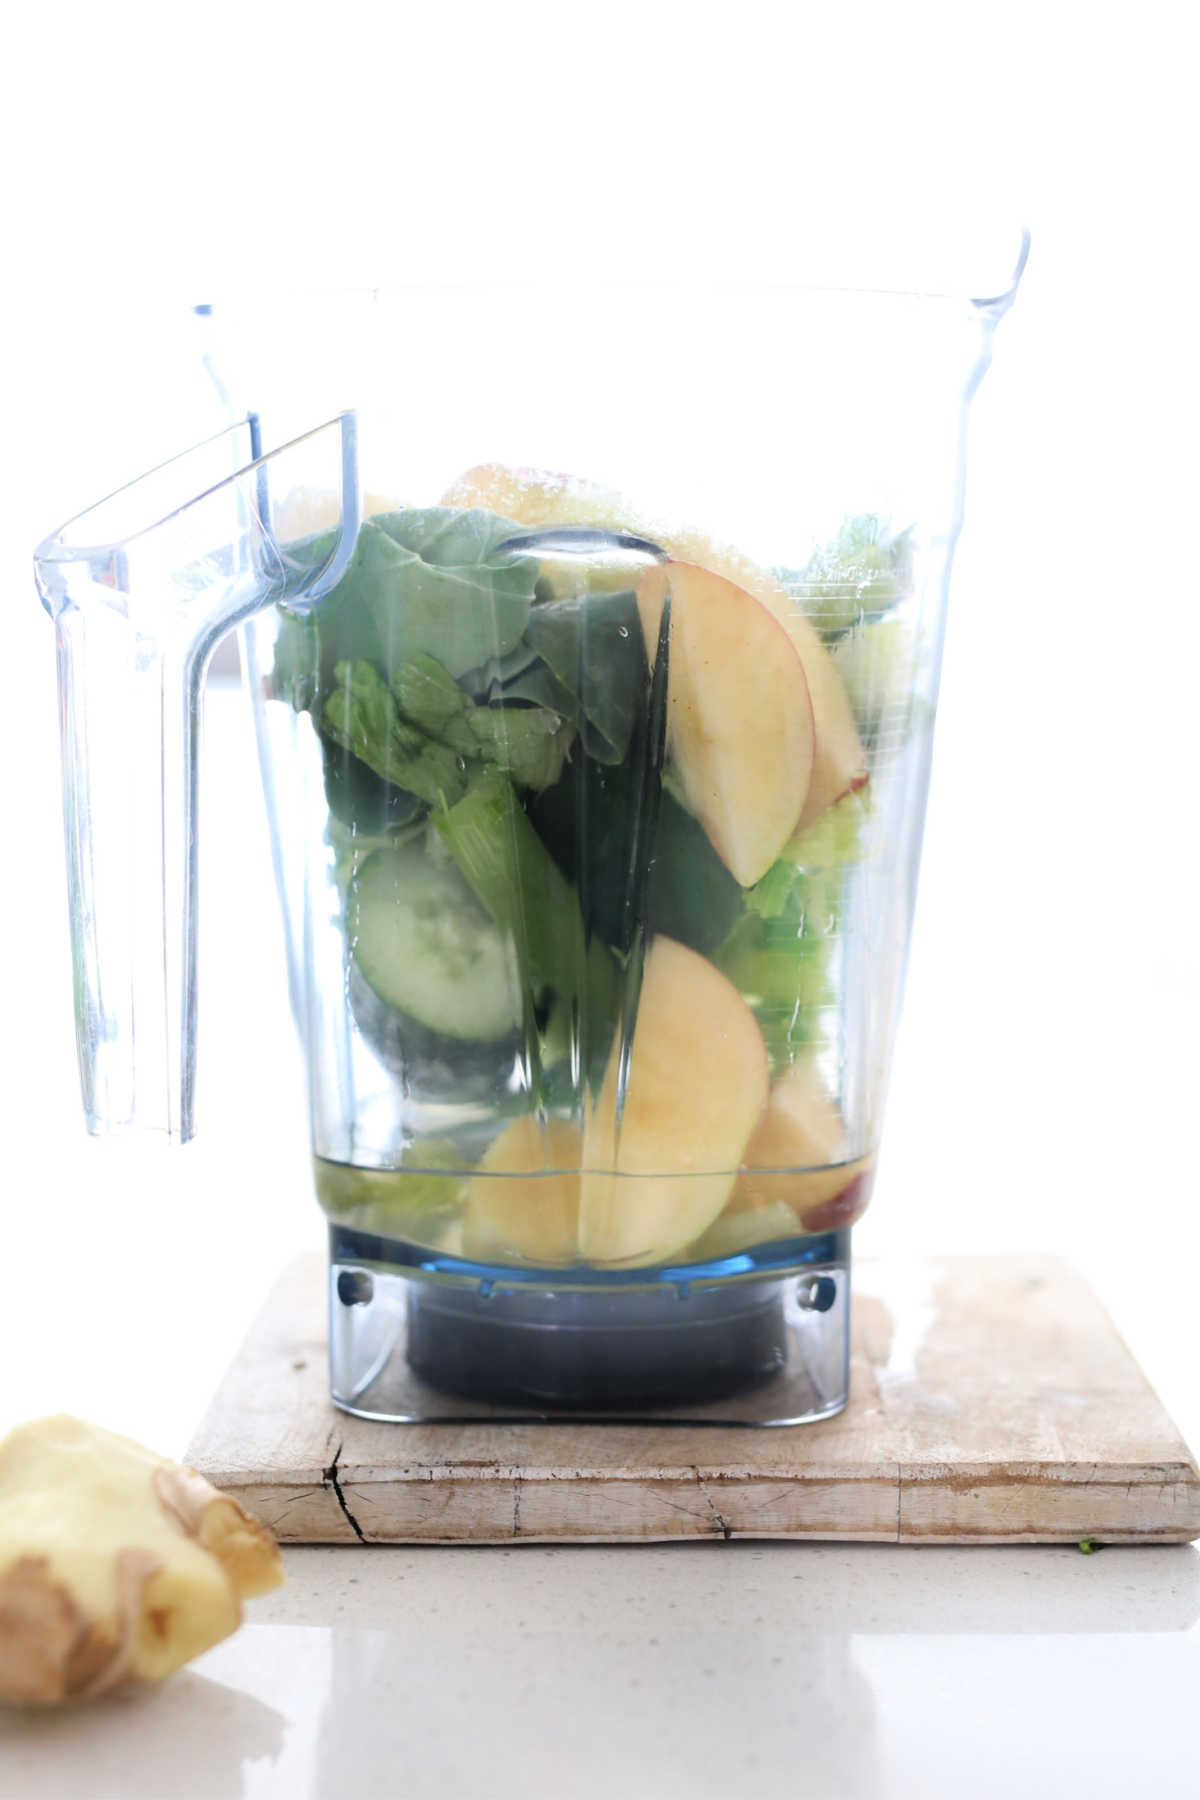 Fruits and vegetables in a blender to juice.